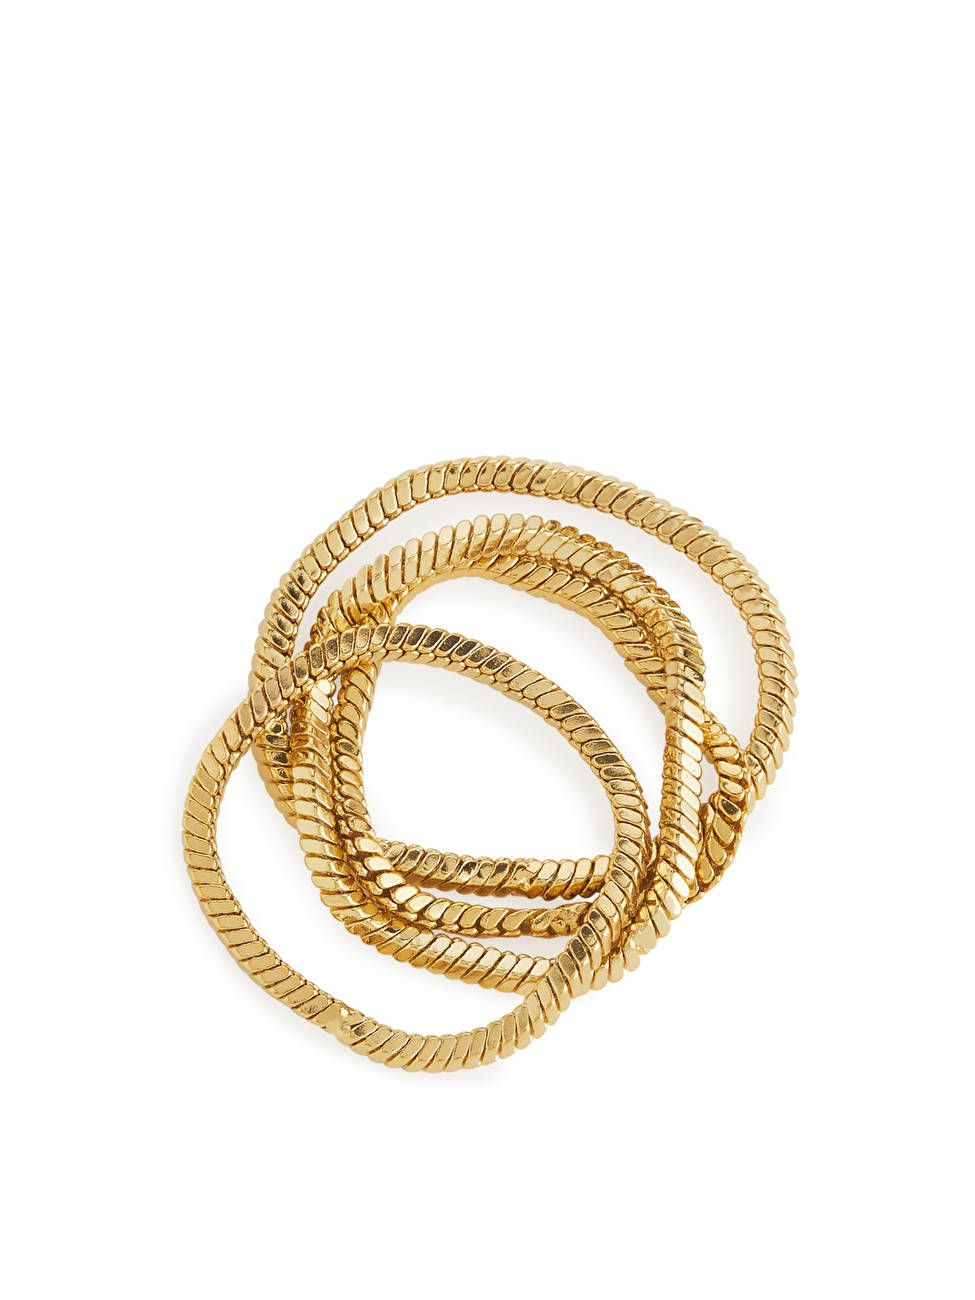 Gold-Plated Chain Ring Set of 4 - Gold - ARKET GB | ARKET (US&UK)